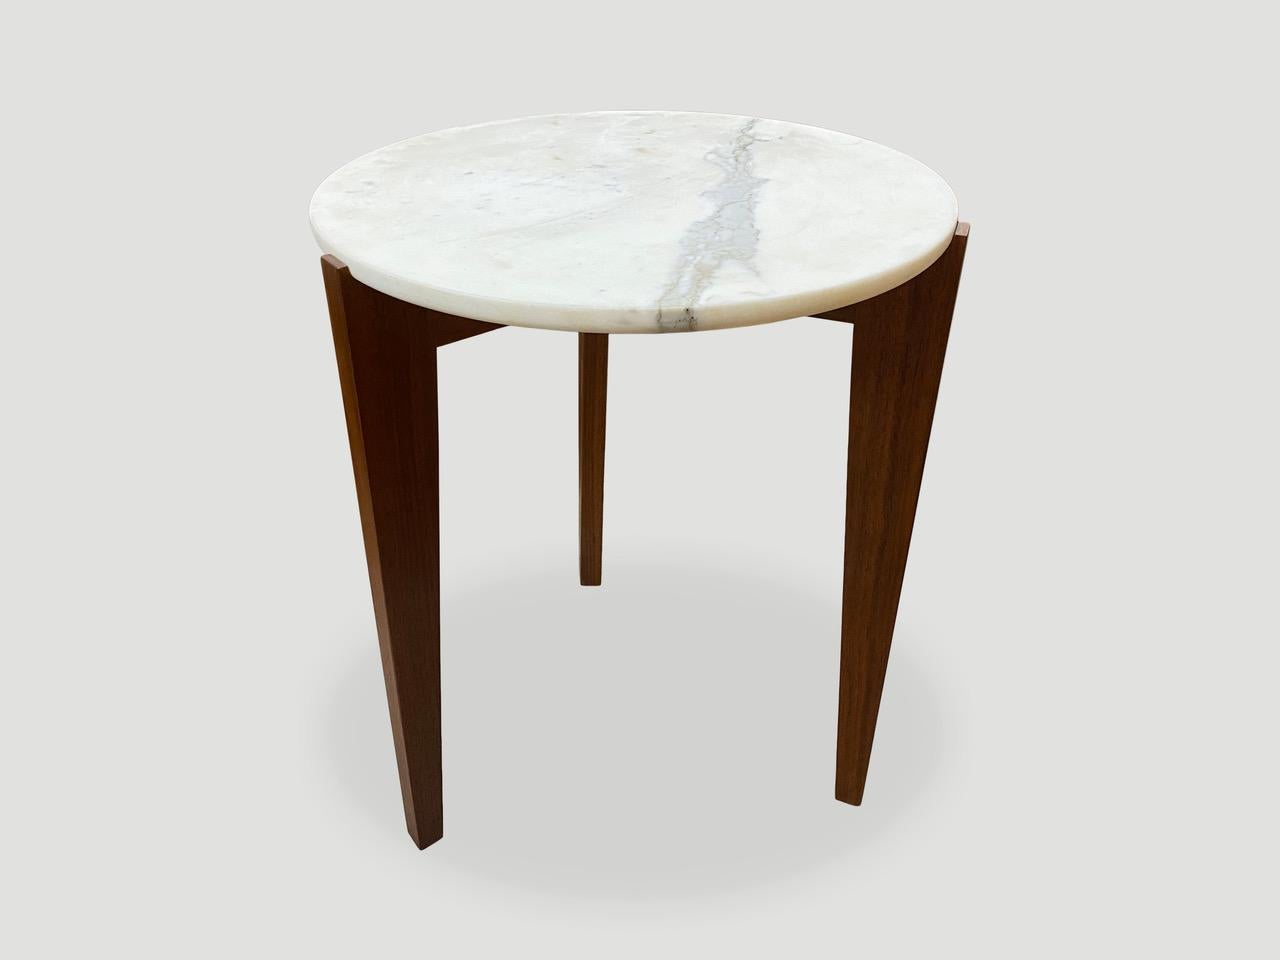 Minimalist one inch thick Italian marble top rests on solid walnut legs. From the Made in New York Collection. 

Own an Andrianna Shamaris original.

Andrianna Shamaris. The Leader In Modern Organic Design.